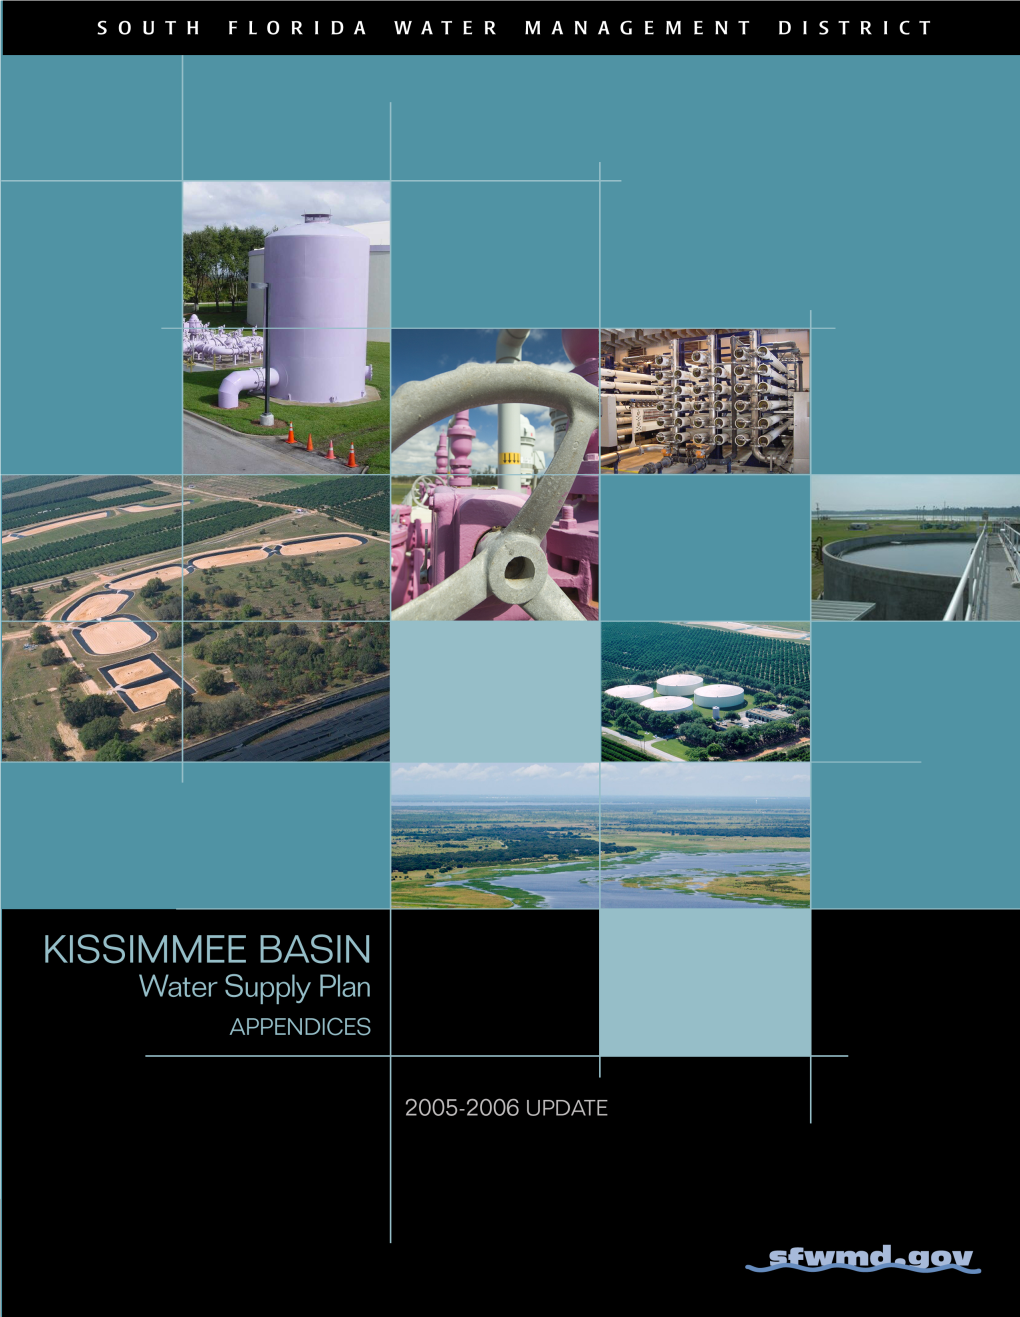 Kissimmee Basin Water Supply Plan (2000 KB Plan), the Planning Process Analyses Identified Key Regional Issues